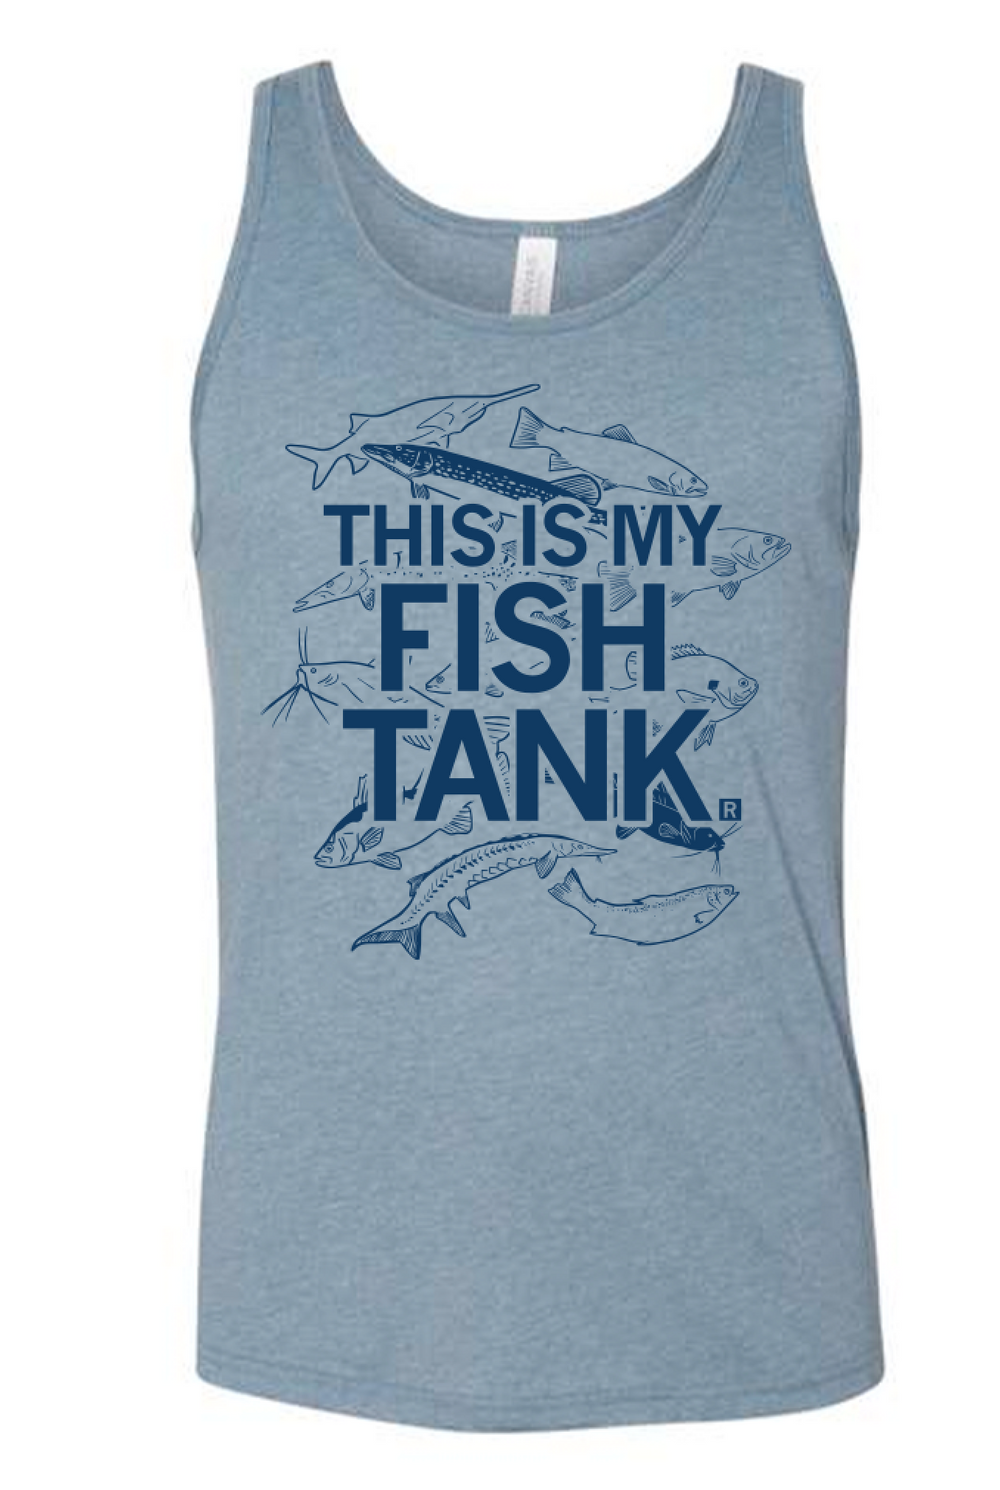 This Is My Fish Tank Top